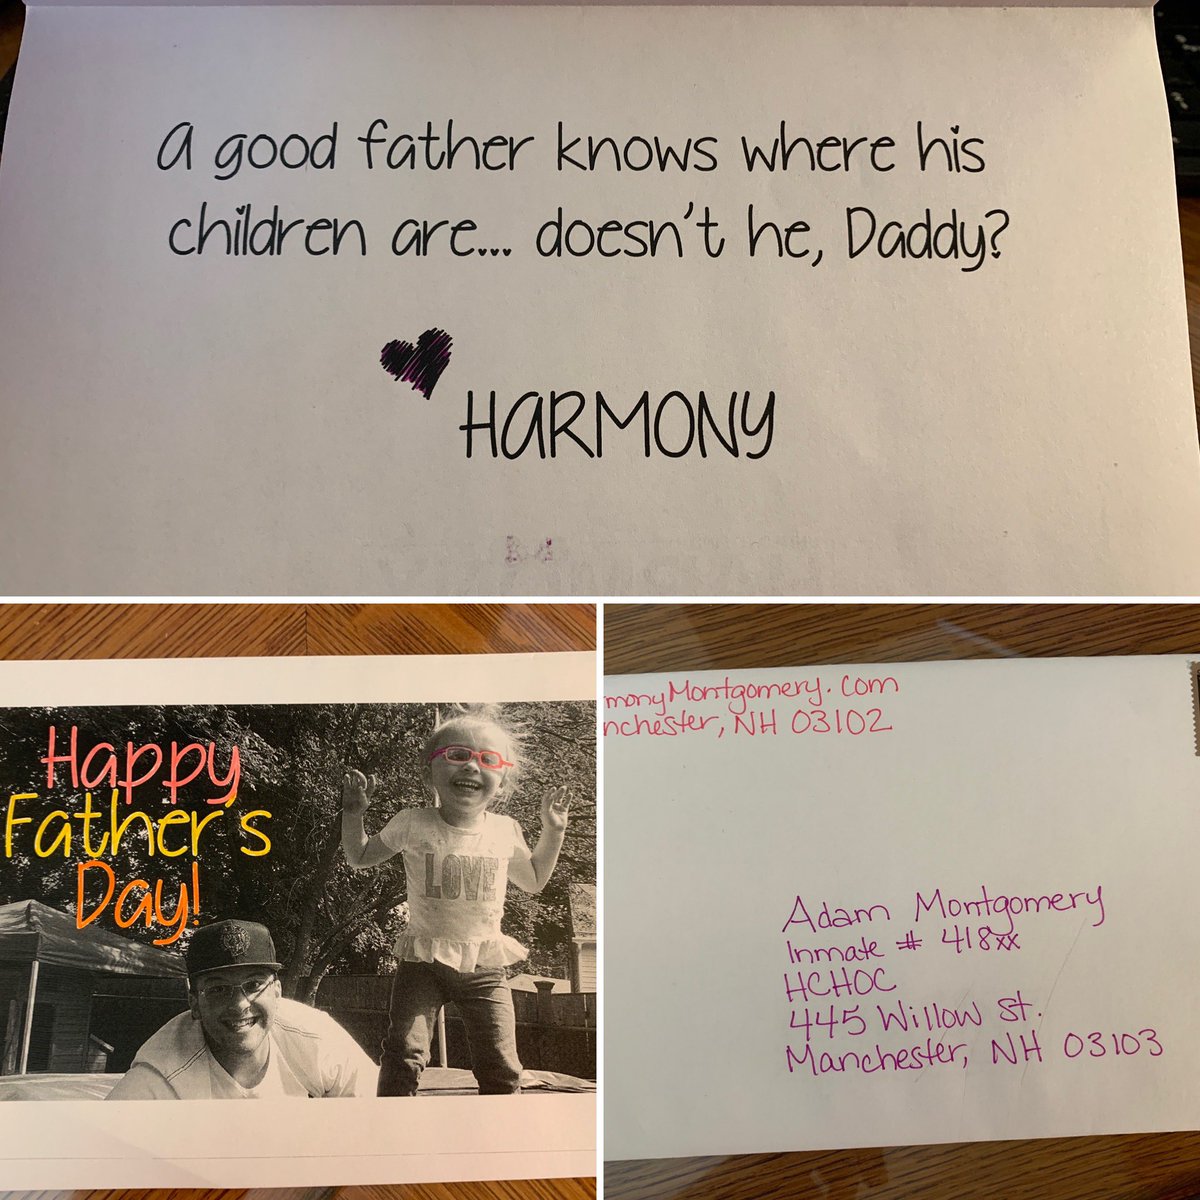 Was literally listening to @CaughtYa164 @MsRedTwice & @DarknessExposed as I dropped #AdamMontgomery’s #FathersDay card from #HarmonyMontgomery at the post office. (I couldn’t help myself from adding color - I know, I know the monster will get a photocopy)